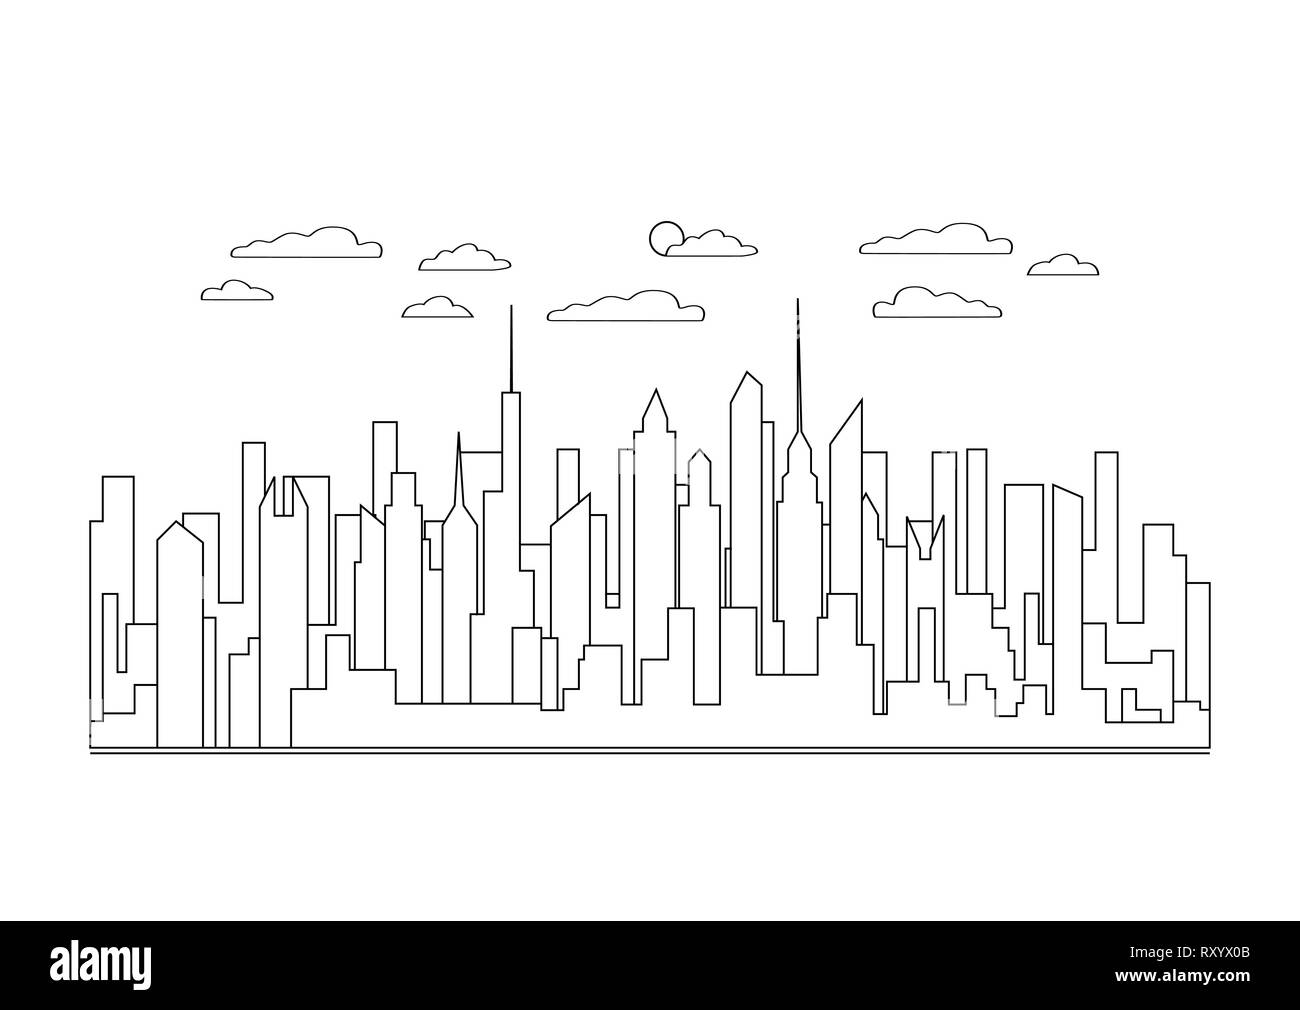 Thin line city landscape icon. Panorama design urban modern city with high skyscrapers, buildings, sky, clouds. Line art stile abstract backround, lin Stock Vector